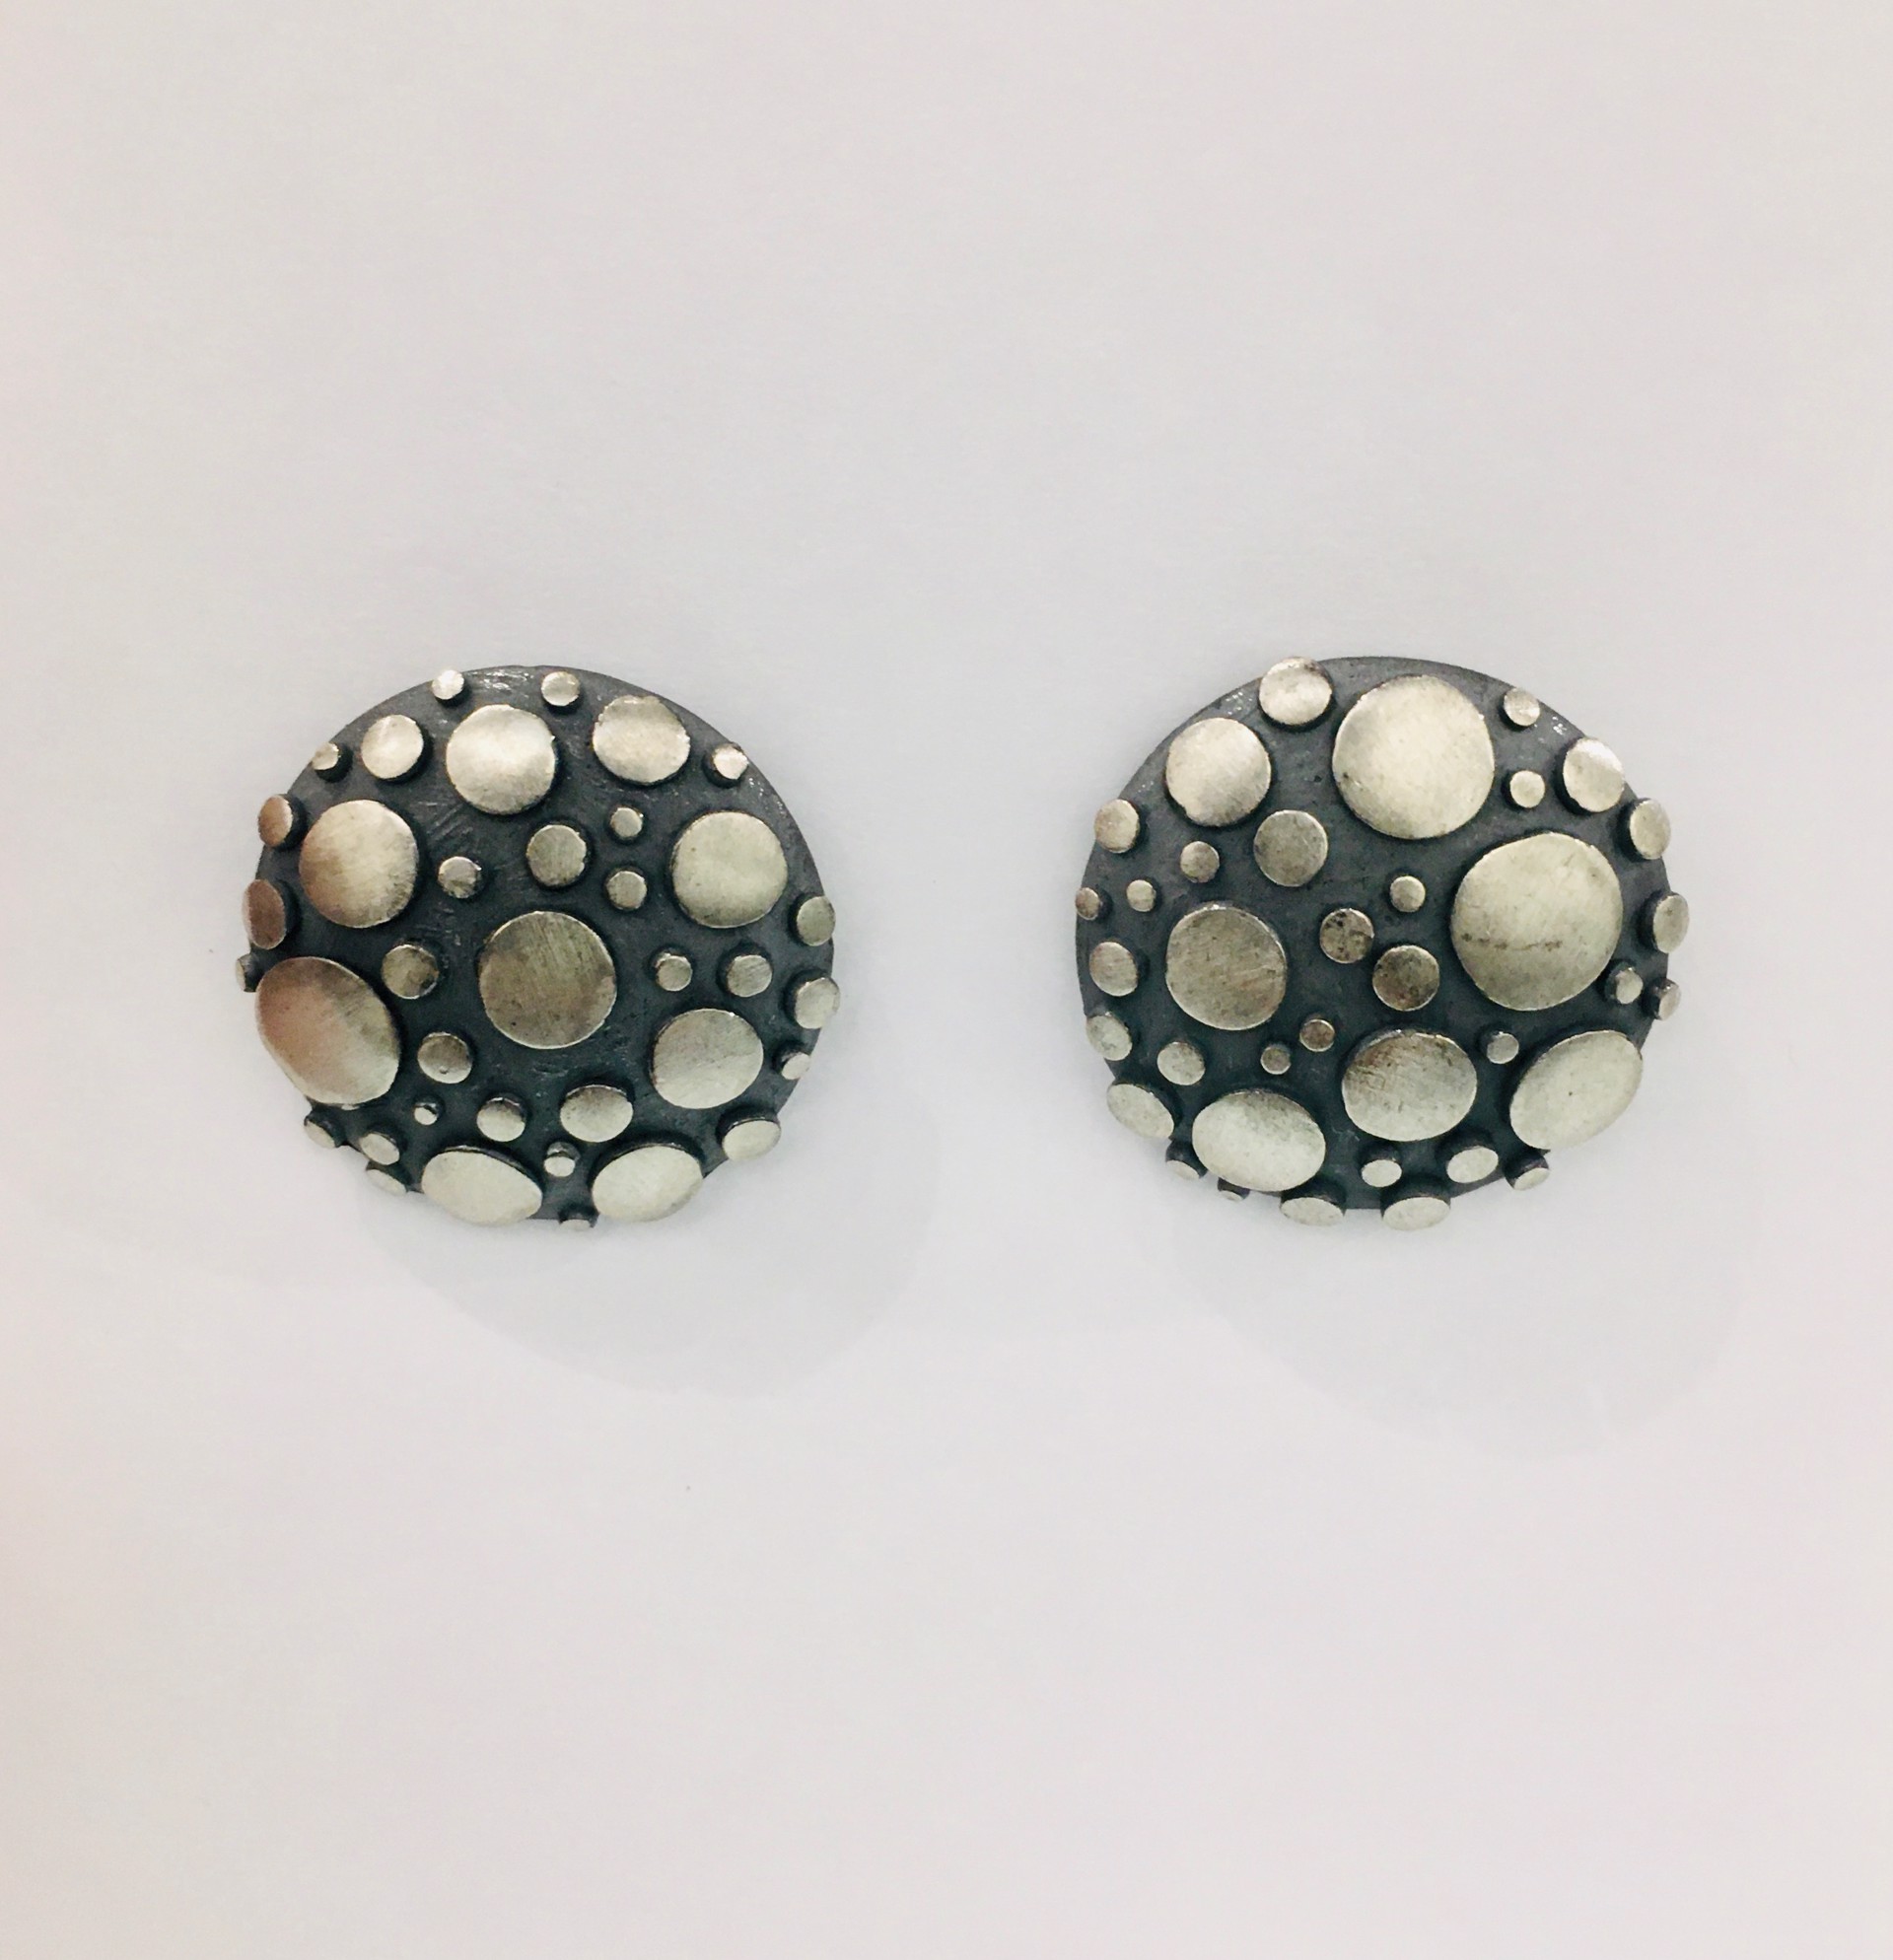 Oxidized Silver Round Earrings by DAHLIA KANNER